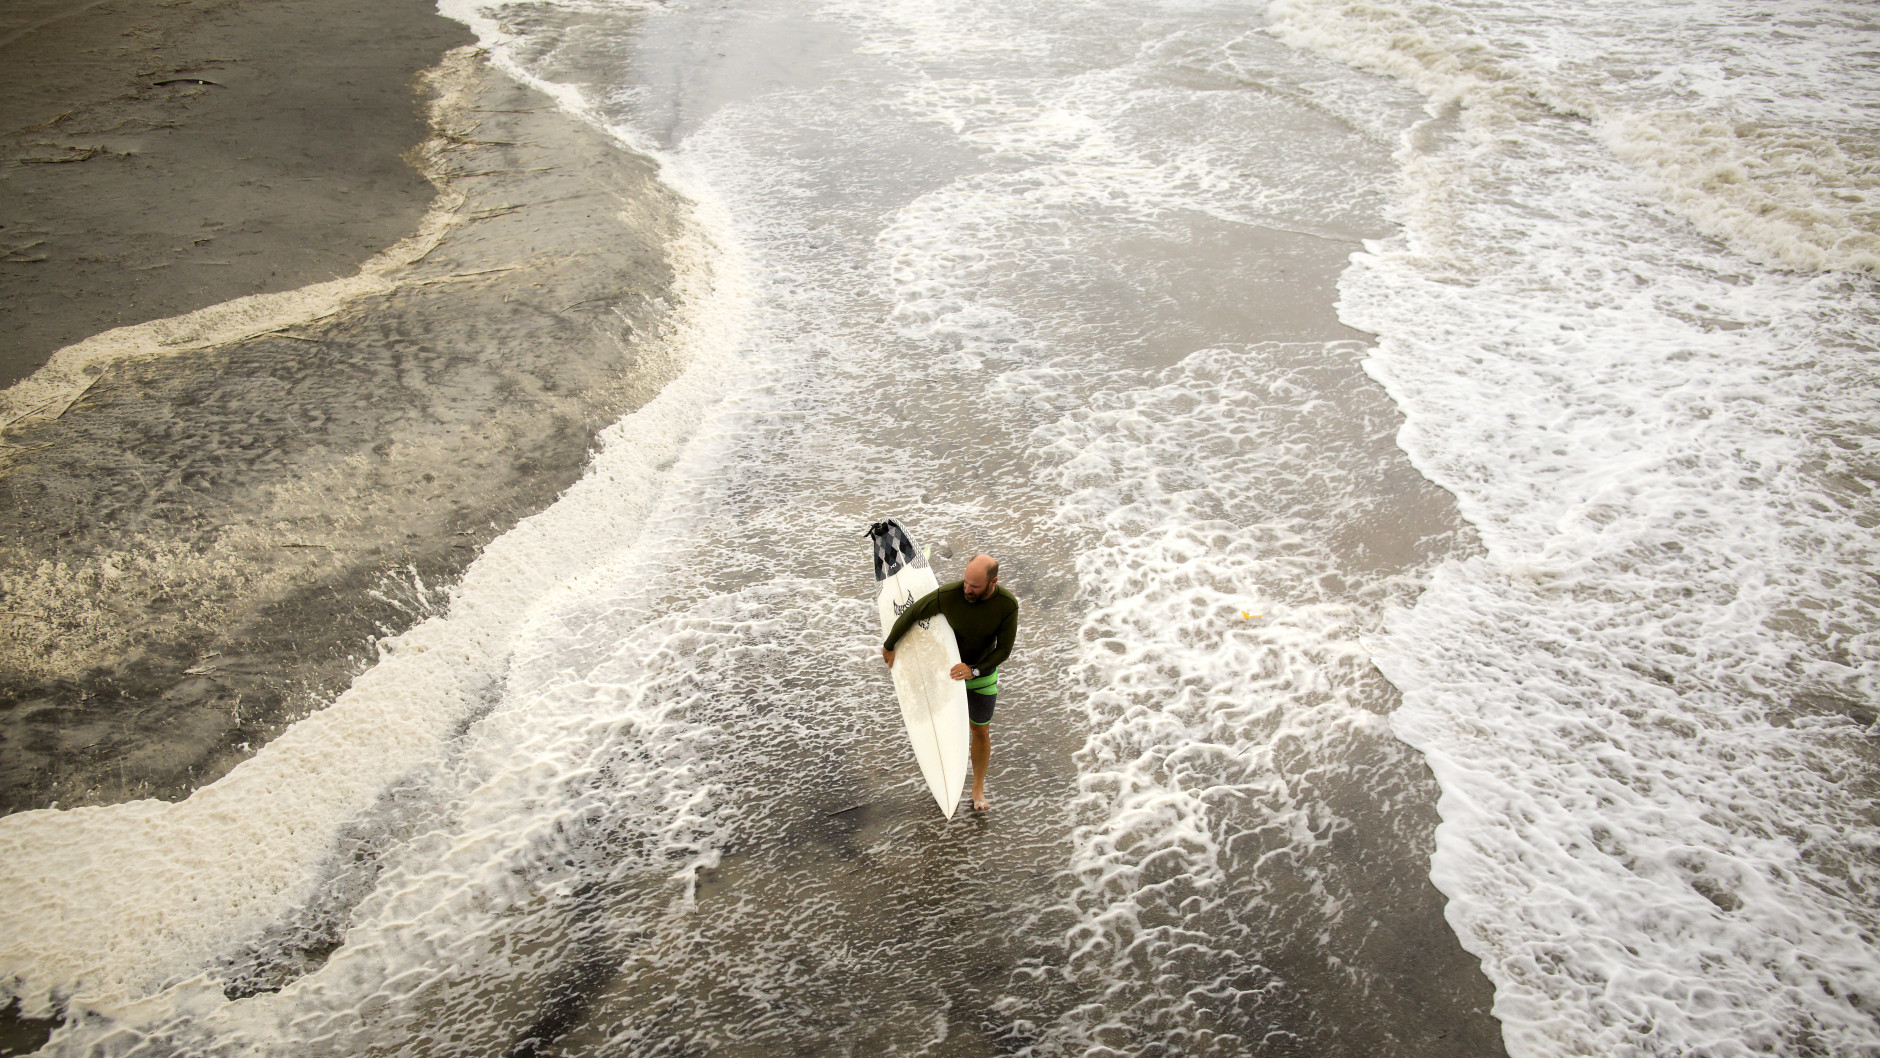 A surfer walks the beach while looking for waves from the surge of Hurricane Hermine, Friday, Sept. 2, 2016, off the coast of Tybee Island, Ga.  Hermine was downgraded to a tropical storm after it made landfall, as it moves over Georgia, but the U.S. National Hurricane Center says winds are increasing along the Southeast coast and flooding rains continue.  (AP Photo/Stephen B. Morton)